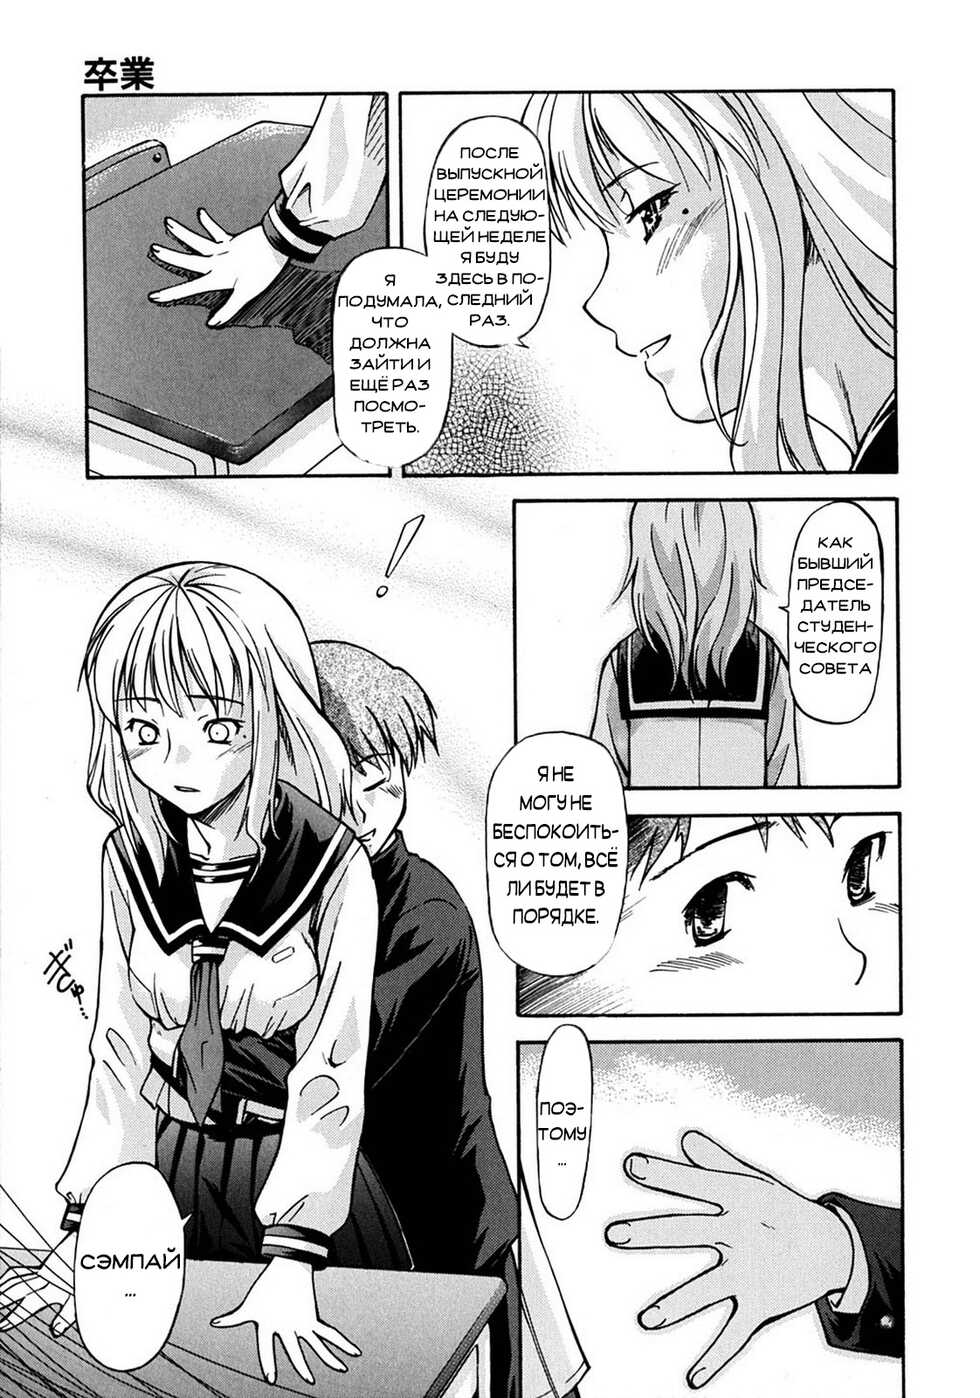 [Nagare Ippon] Week Point [Russian] - Page 40